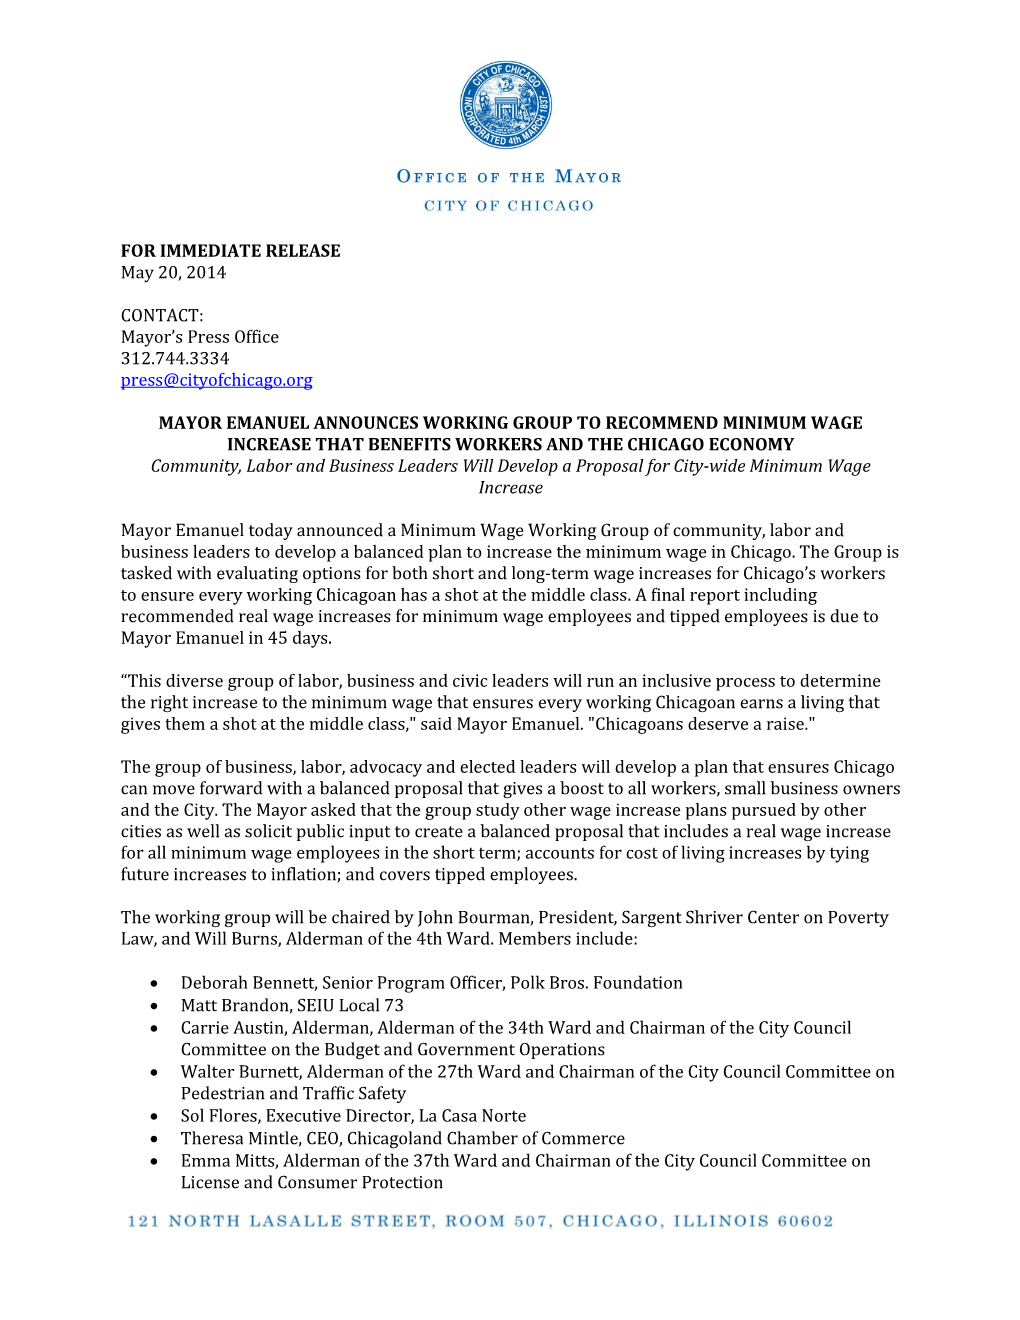 FOR IMMEDIATE RELEASE May 20, 2014 CONTACT: Mayor's Press